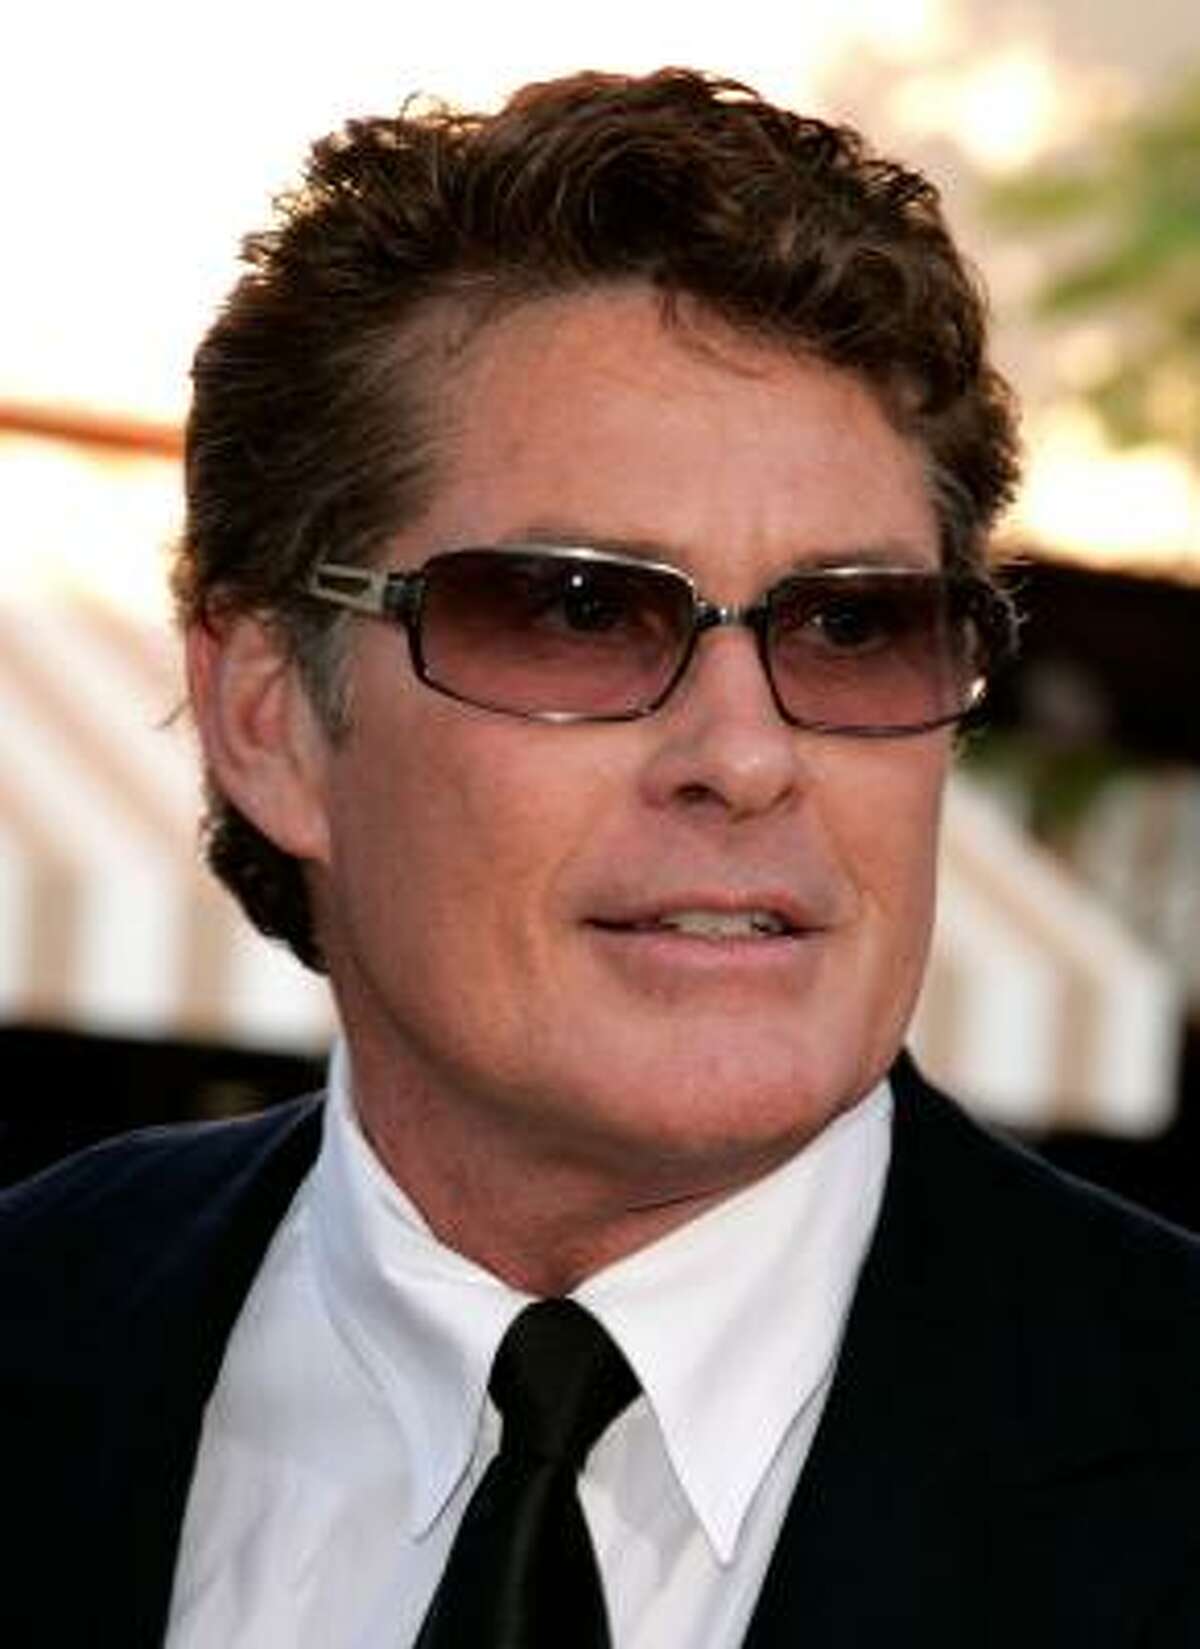 Kids Record Hasselhoff Drunk On Floor For His Own Good